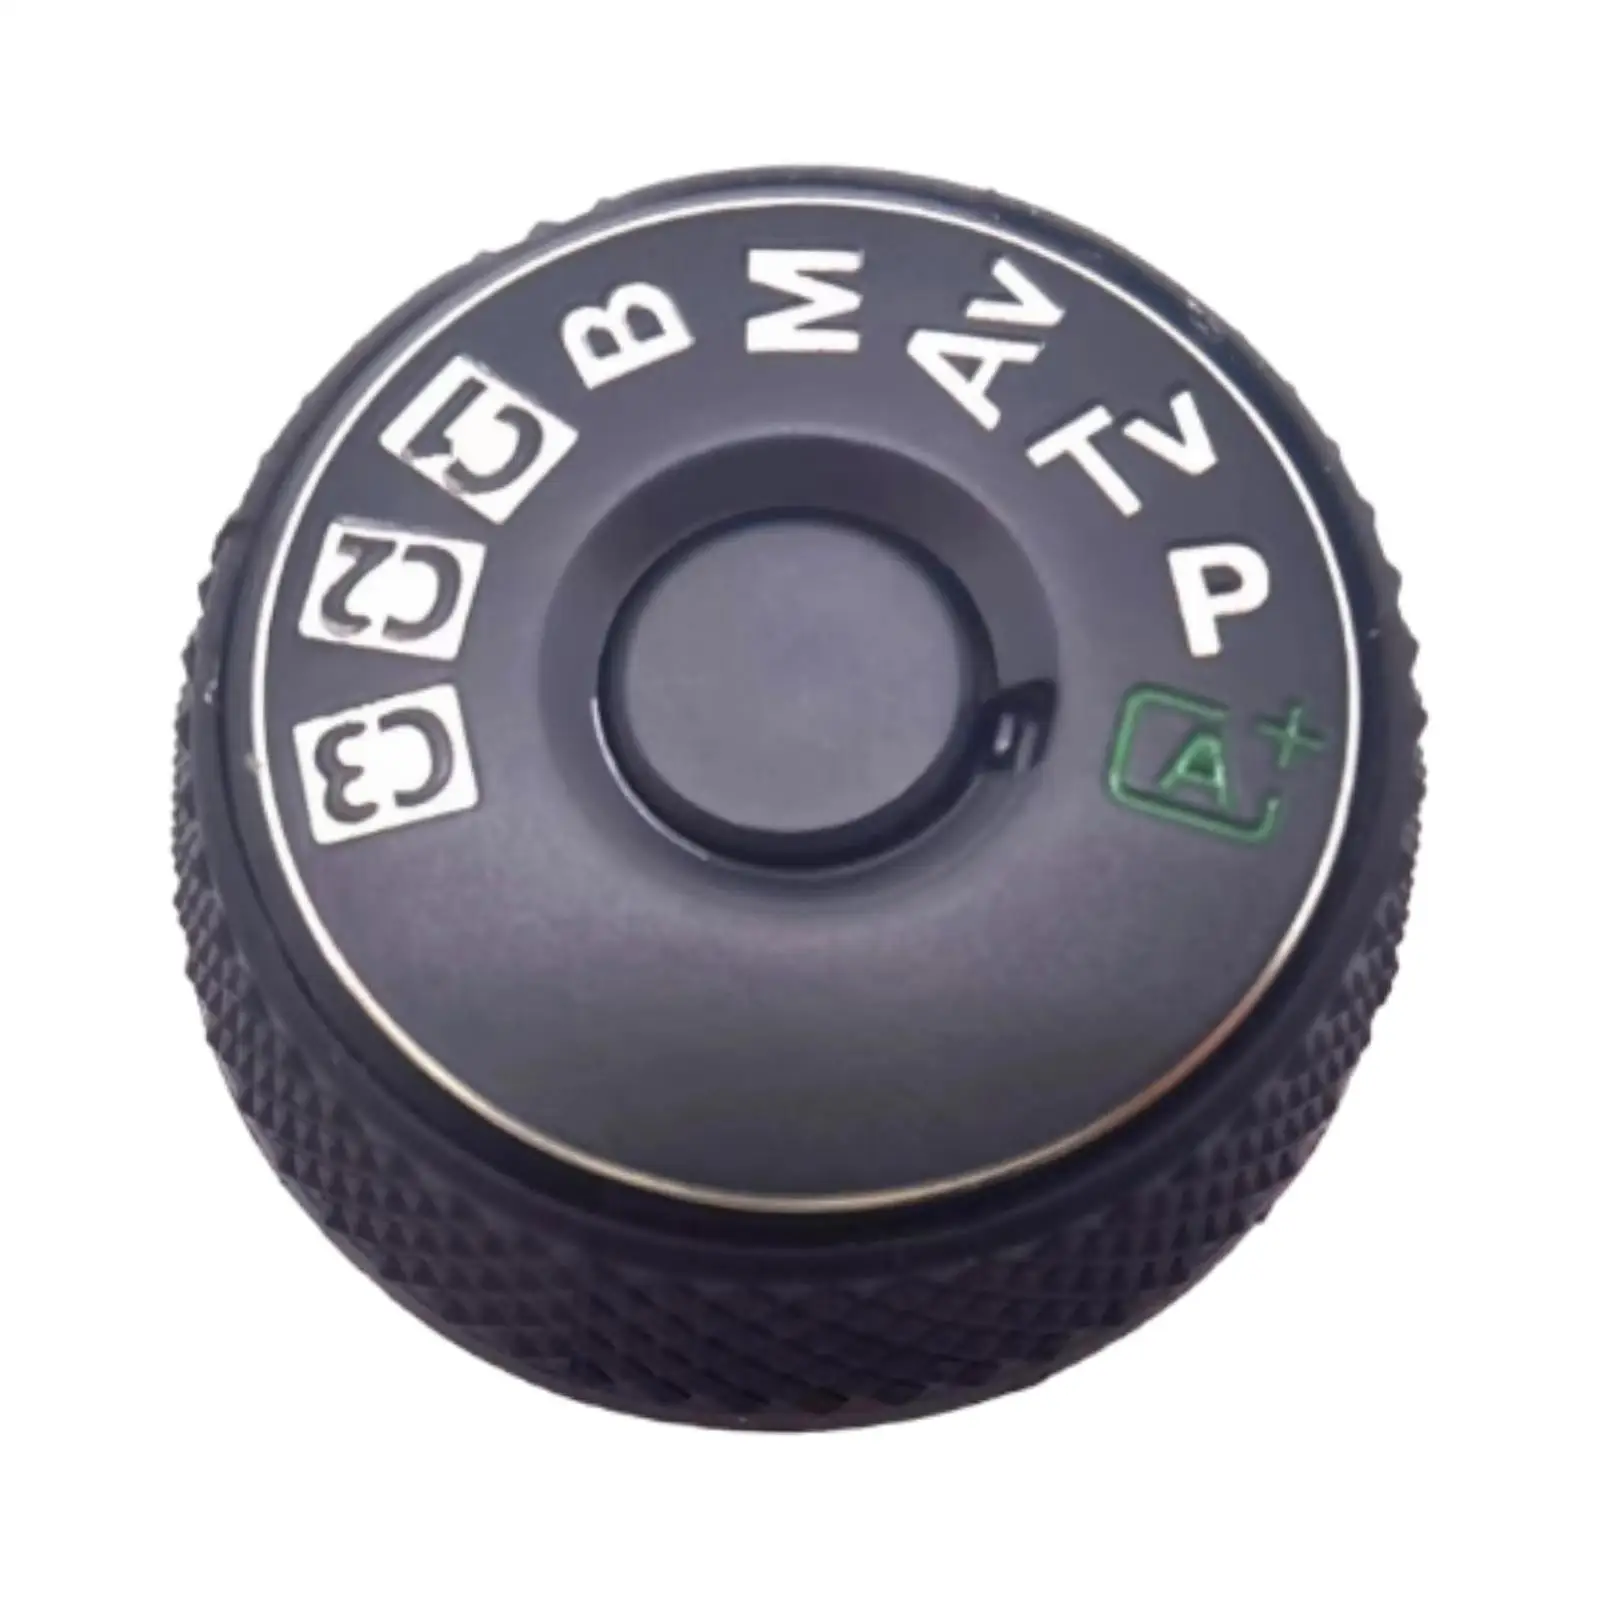 Camera Top Mode Dial Cover Button Digital Camera Repair Part for Canon 5D4 Easy Installation Sturdy Premium Quality